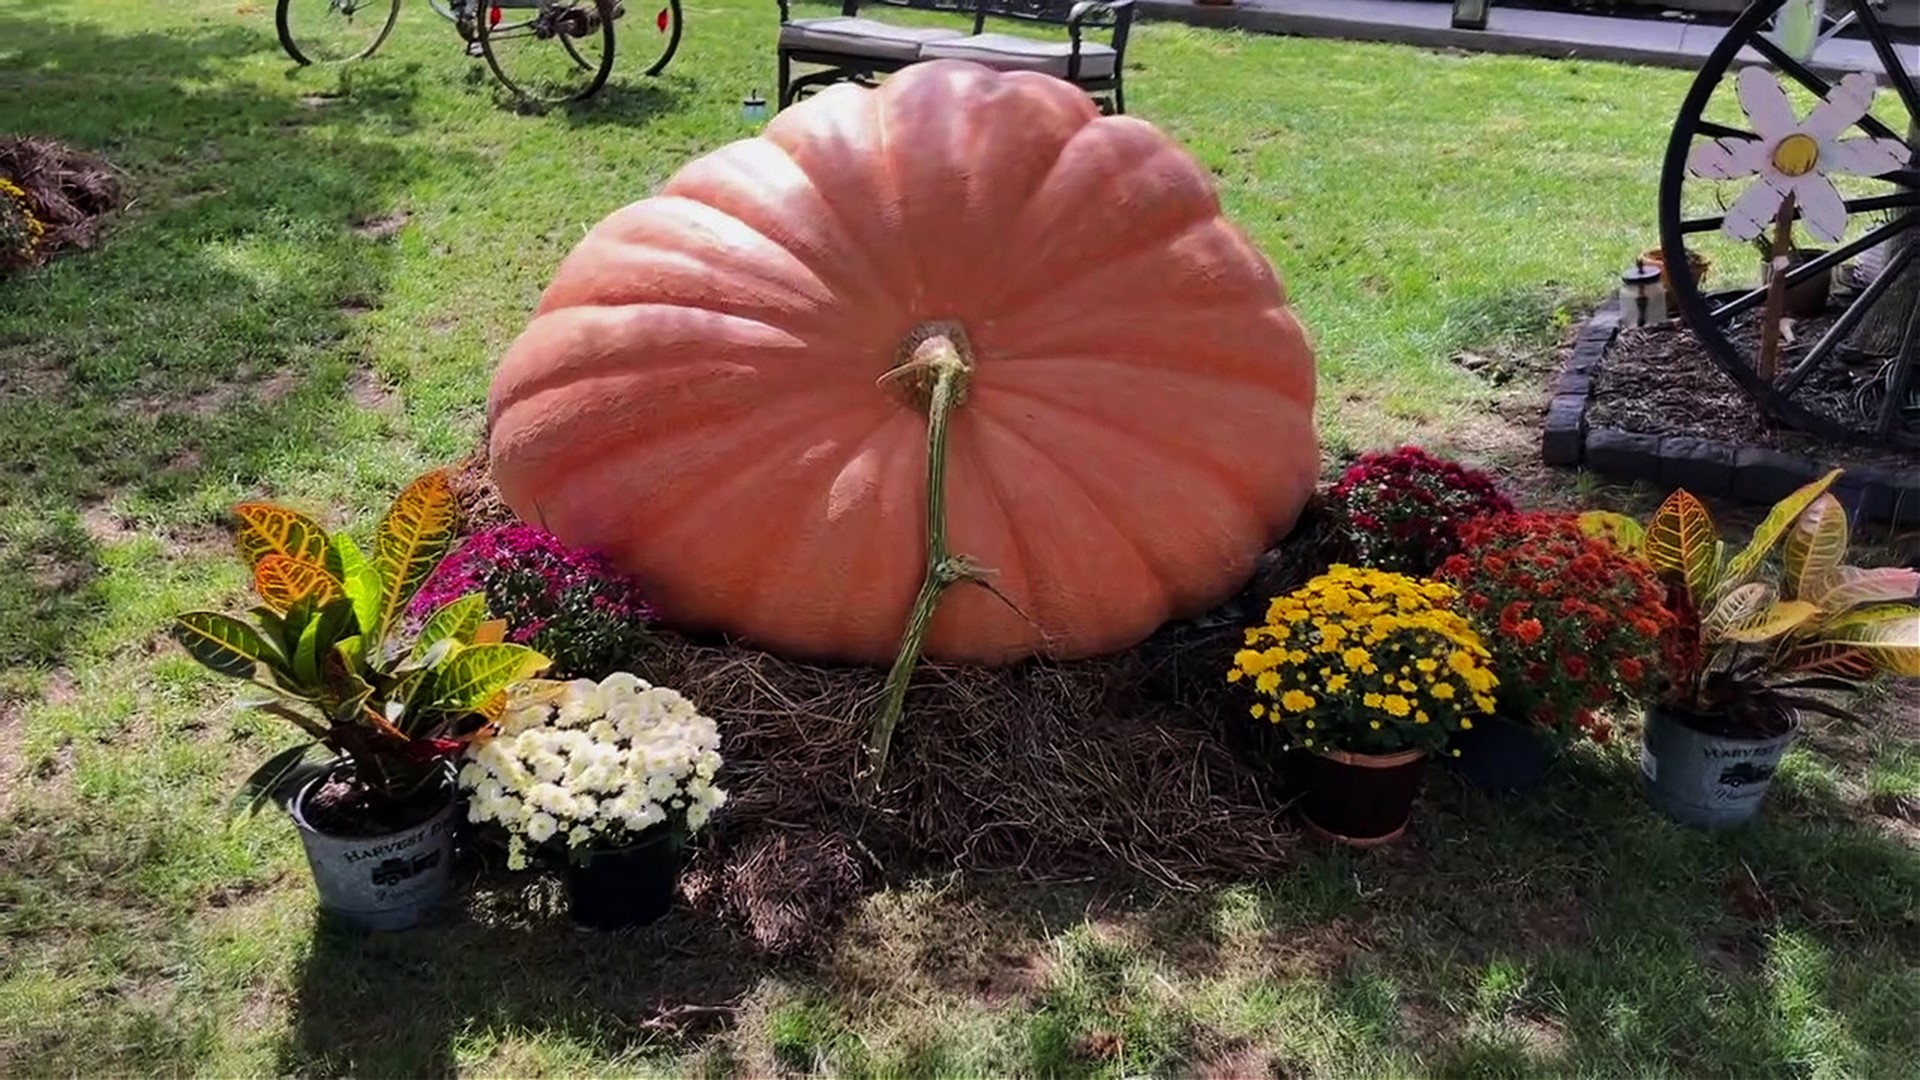 It's 900-pound pumpkin grown by a family determined to get in the record books.